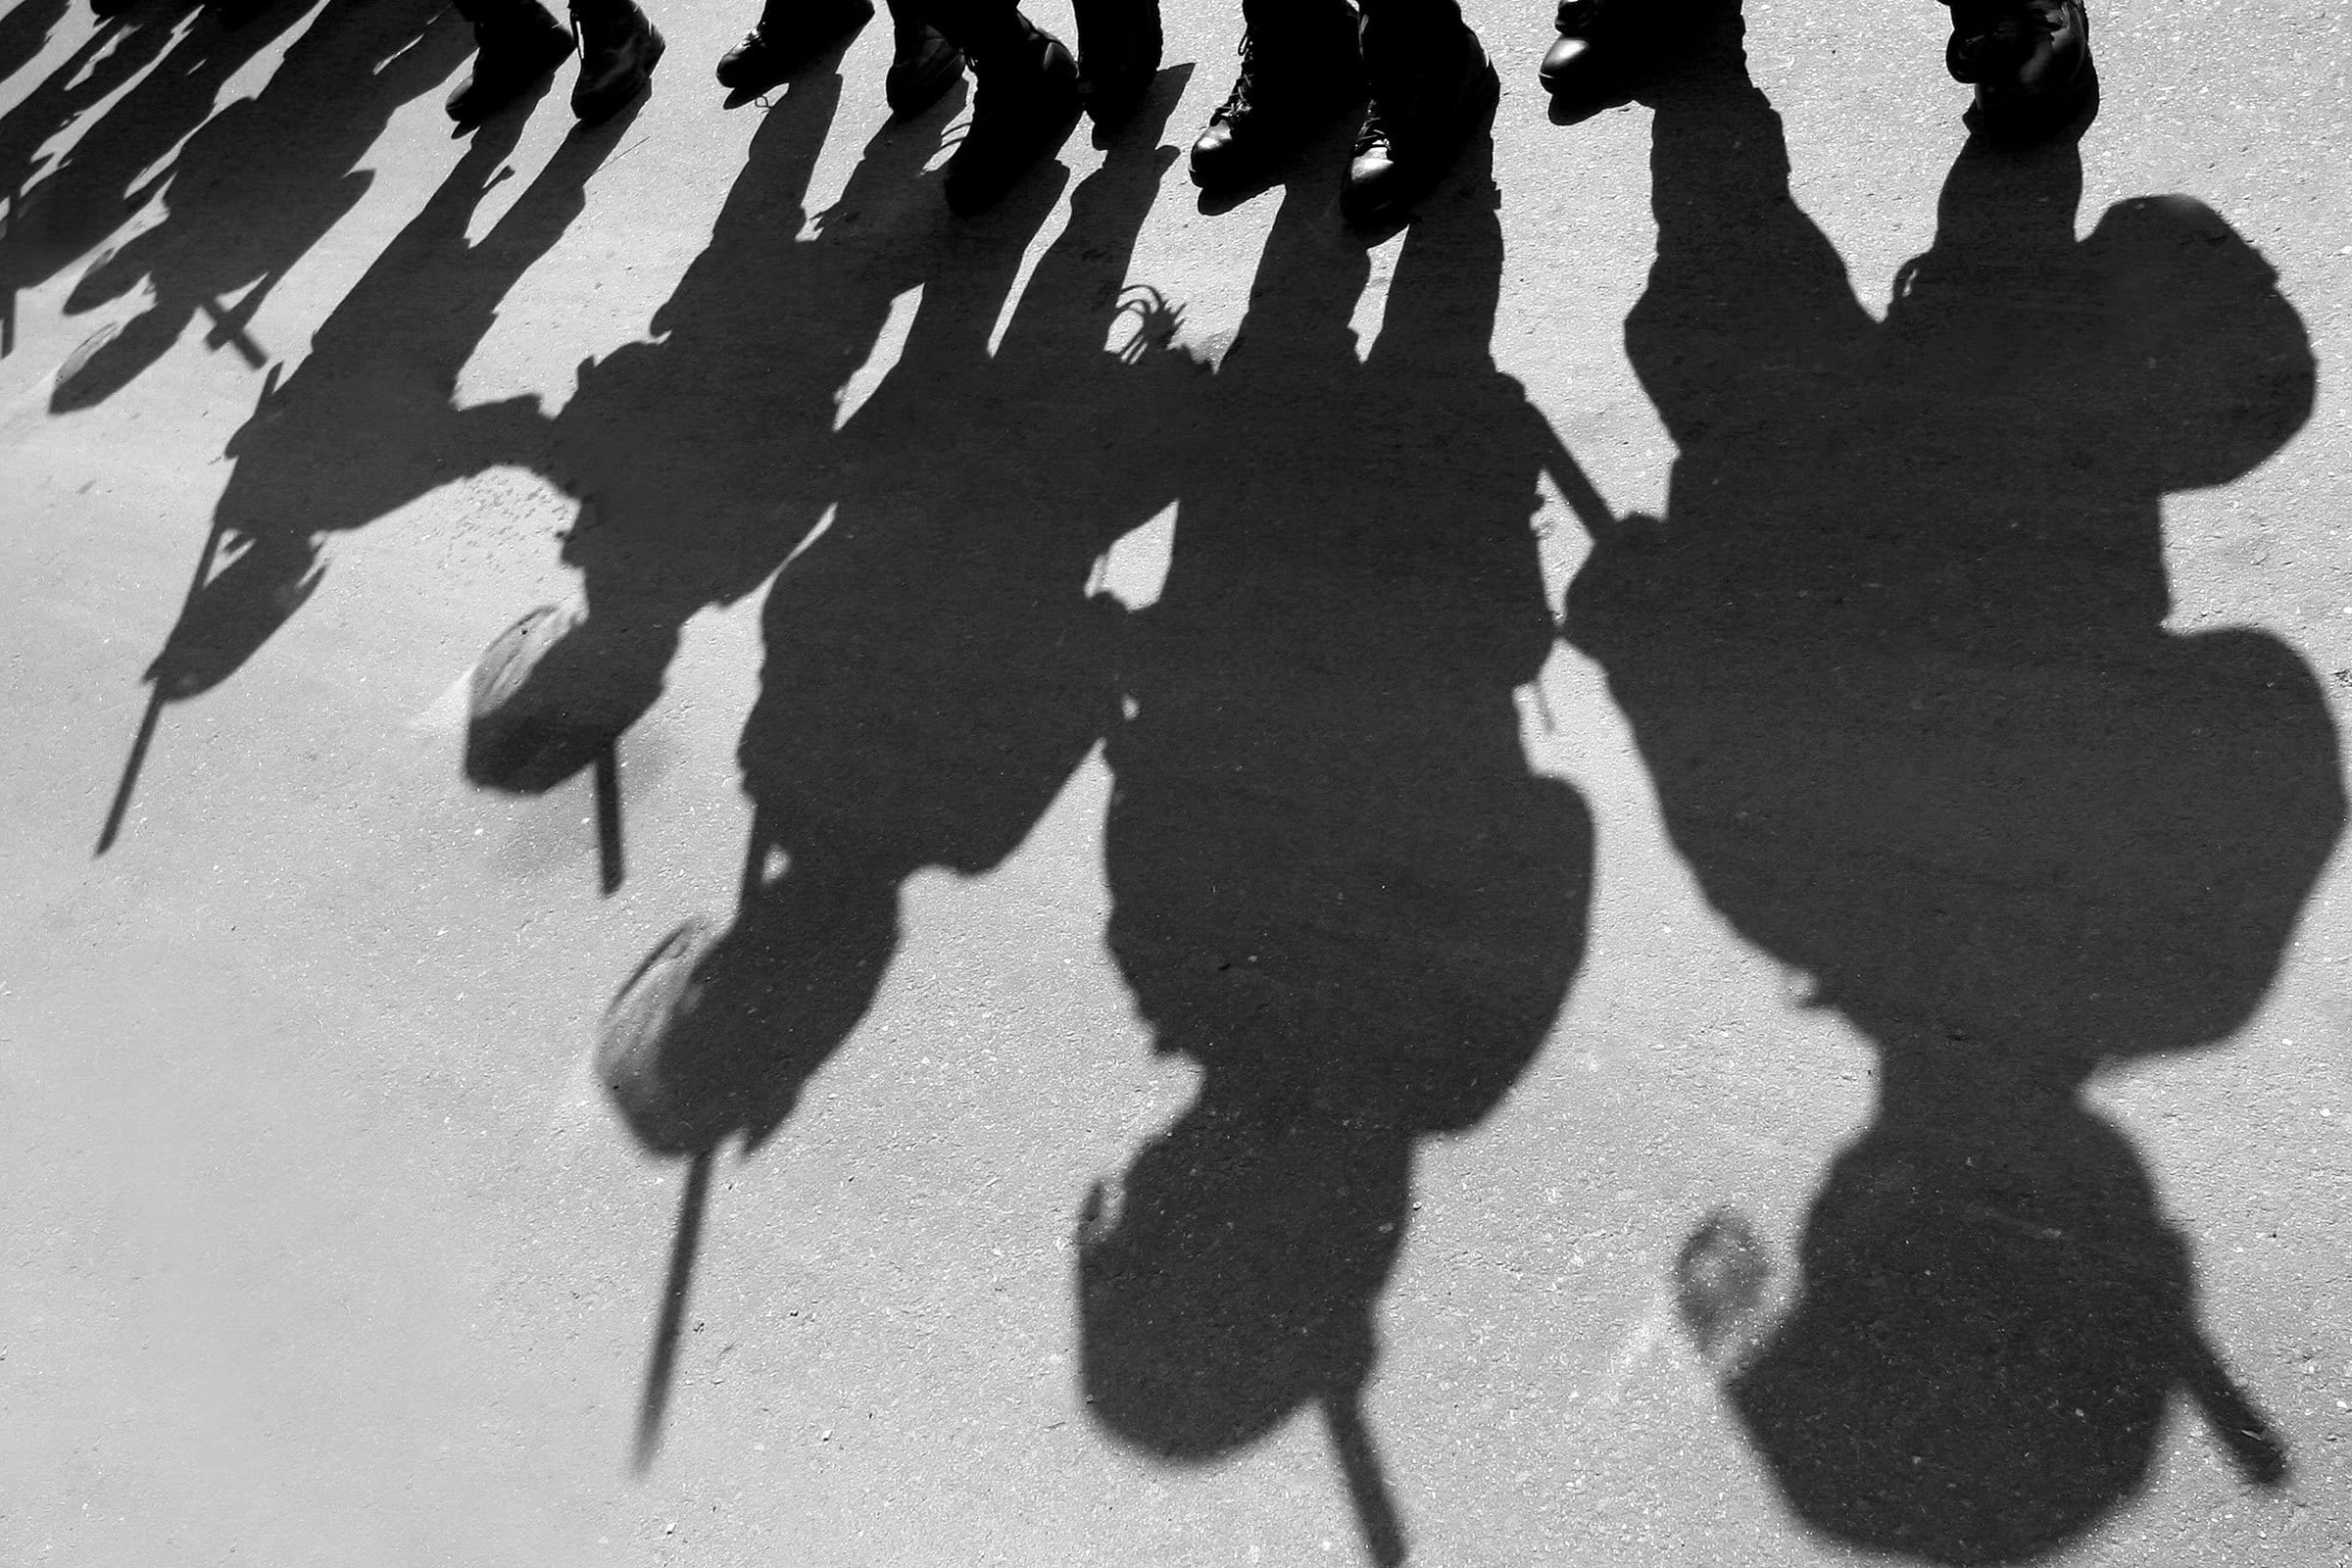 Shadows of people on the street